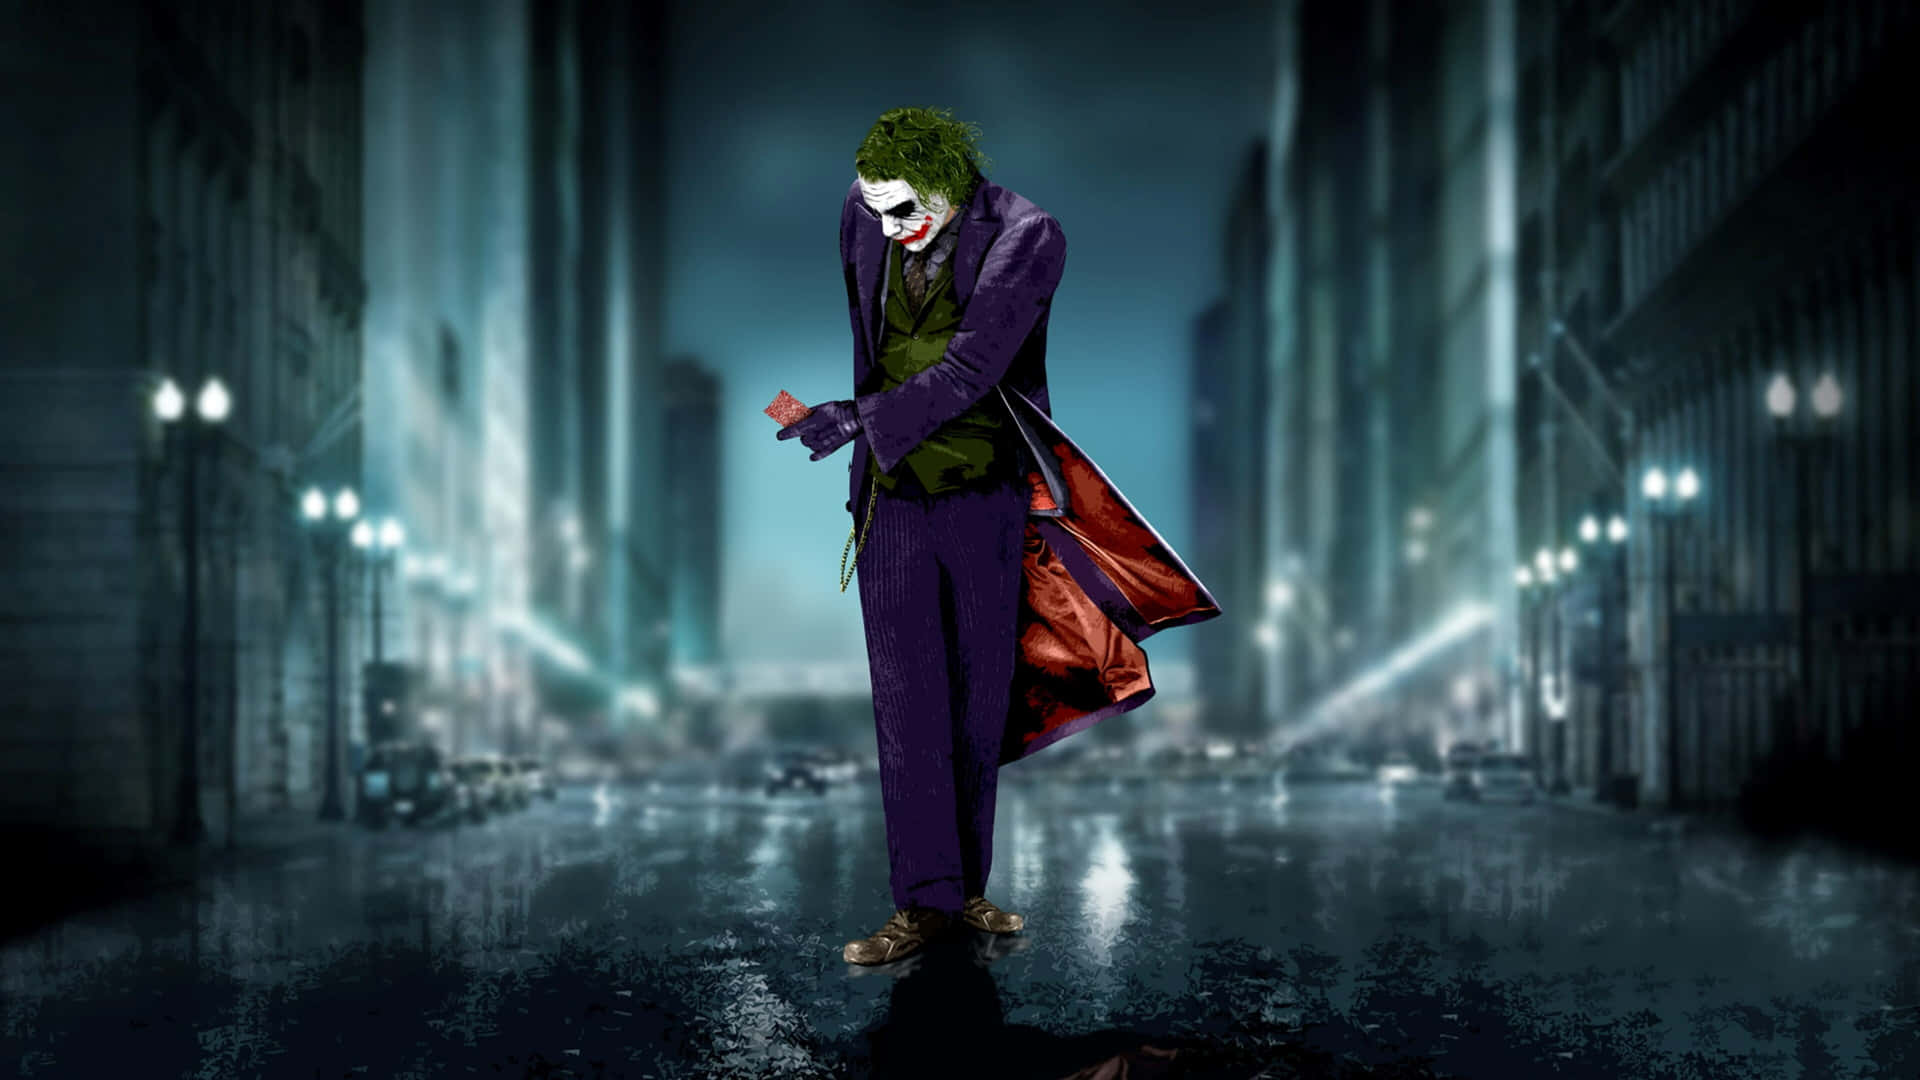 "The Clown Prince of Crime Unleashed" Wallpaper